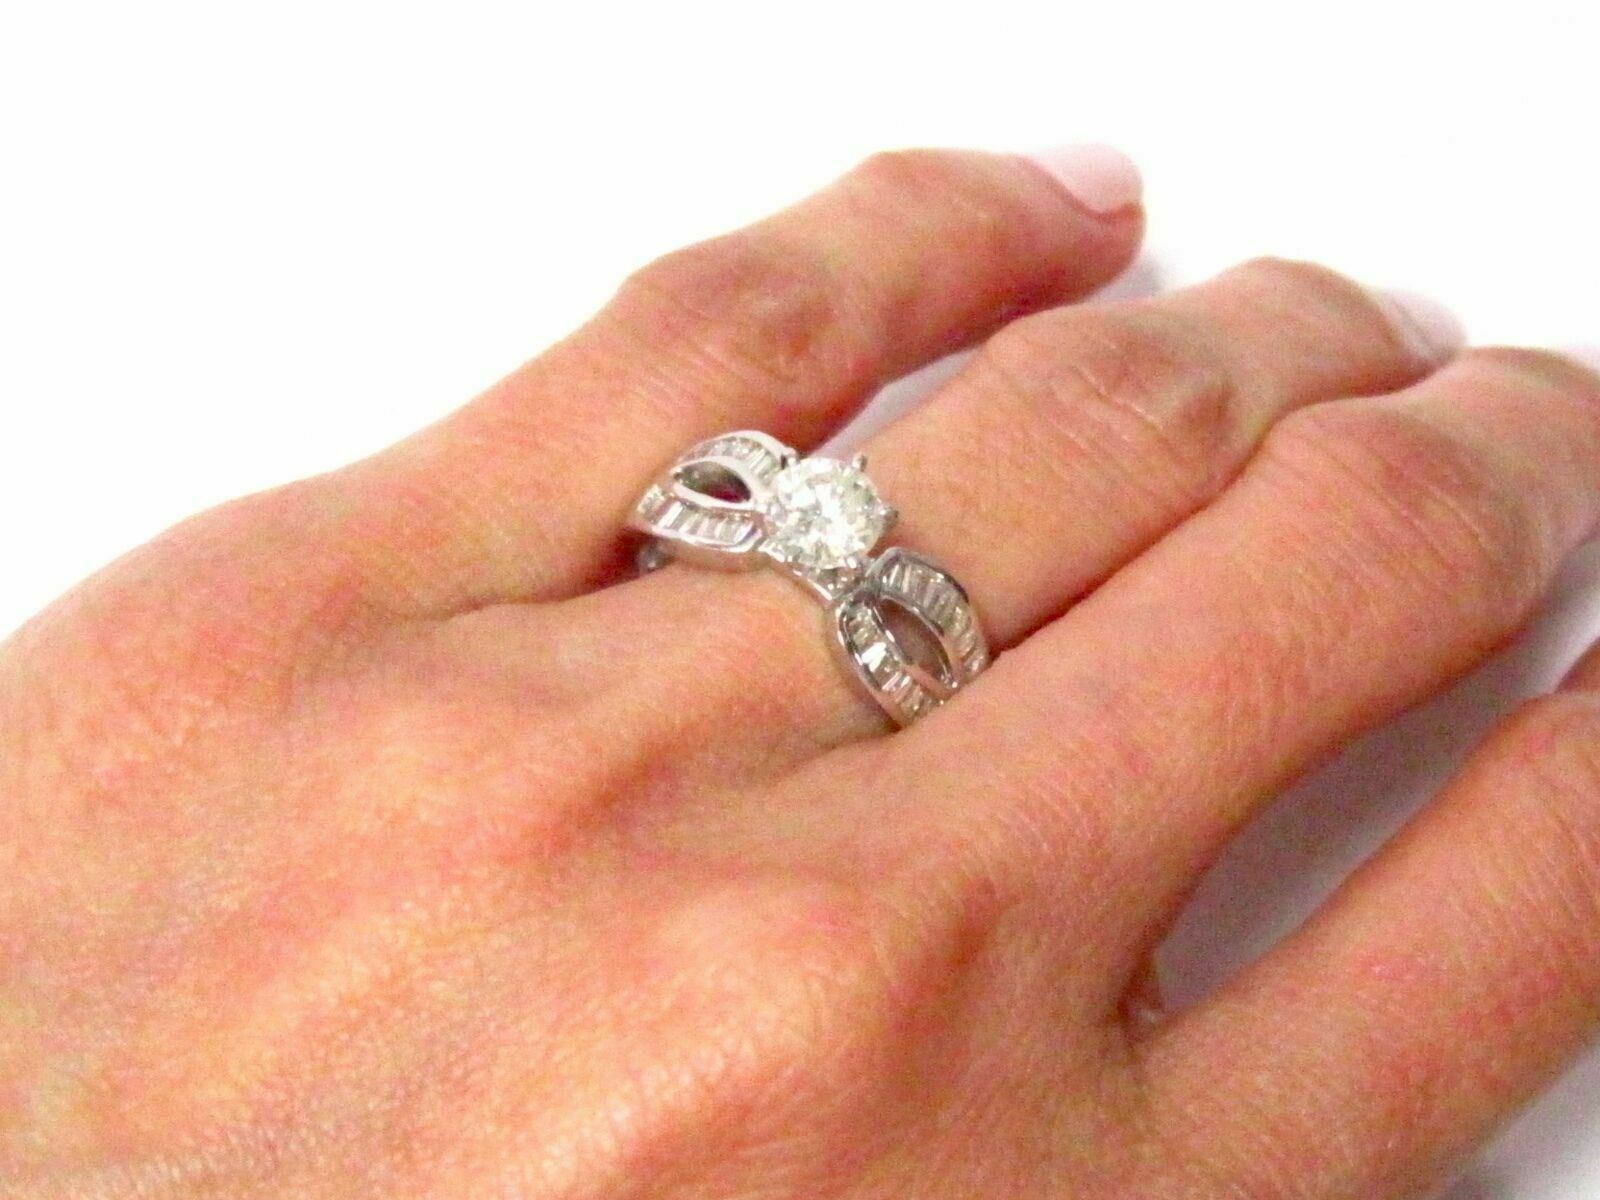 1.19 TCW Round & Baguette Diamonds Engagement/Anniversary Ring Size6.5 H SI1 14k